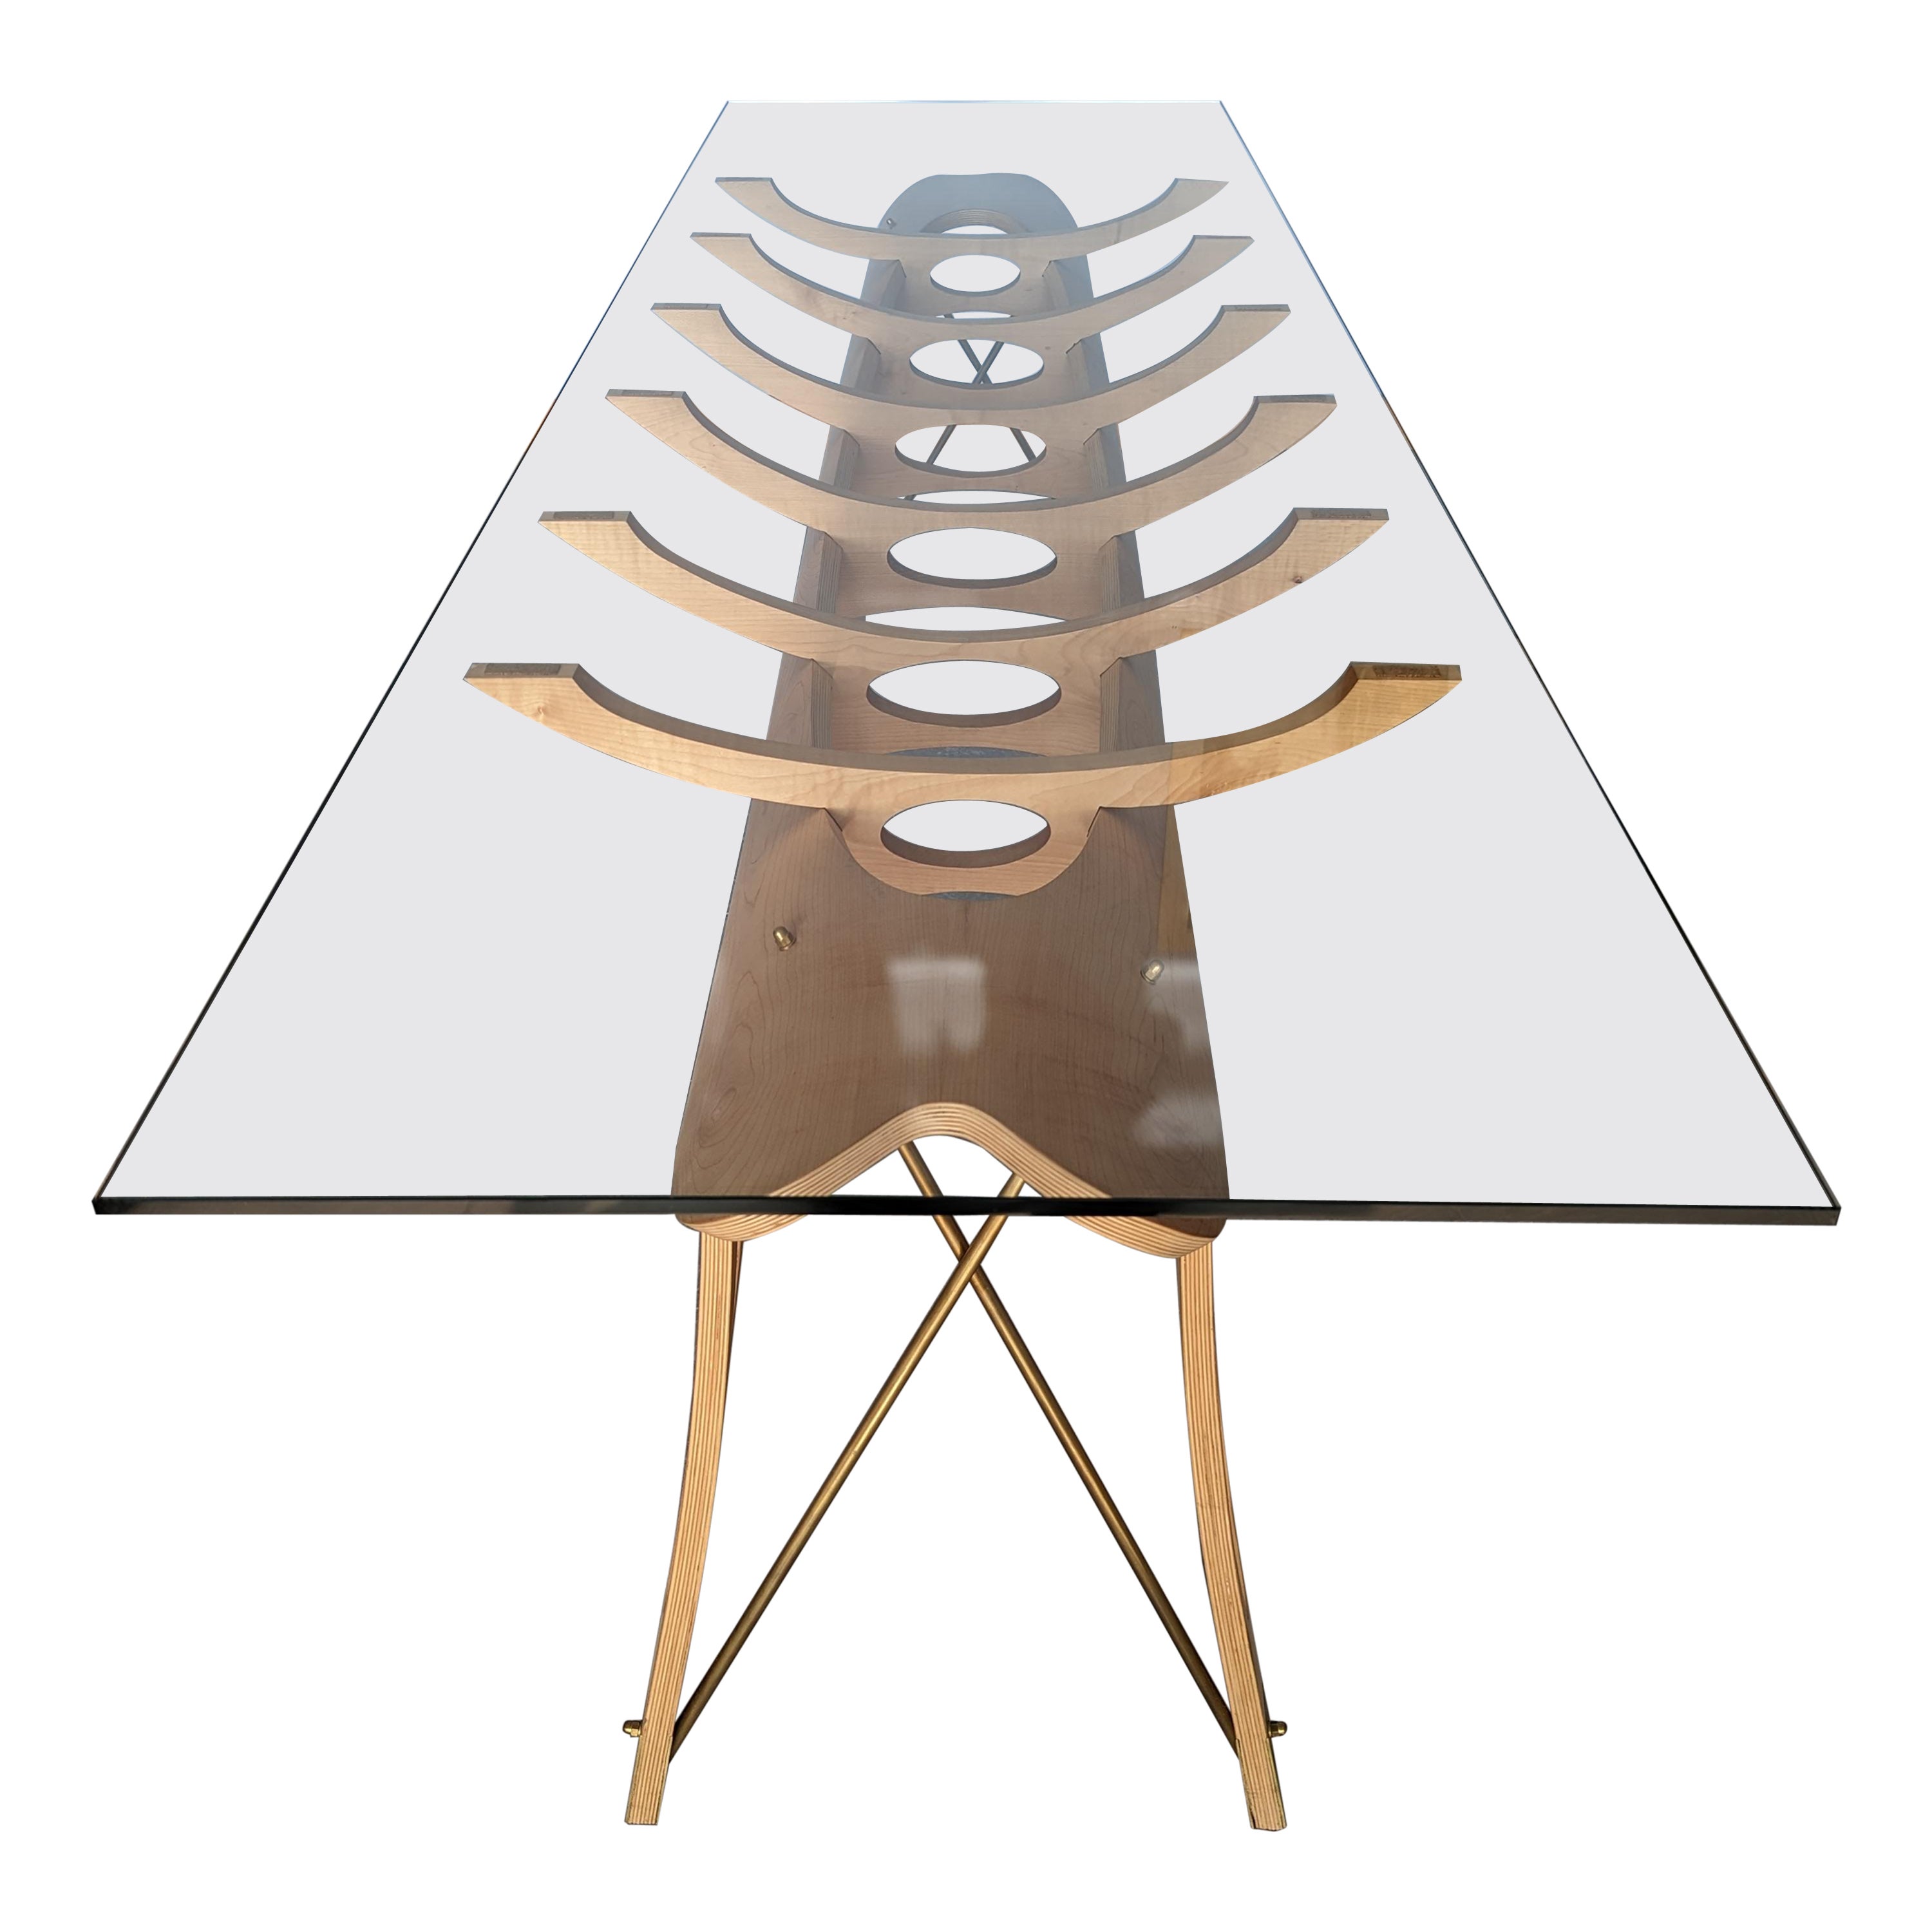 Italian "Dining Table" Designed by Carlo Mollino Limited Handcraft Reproduction